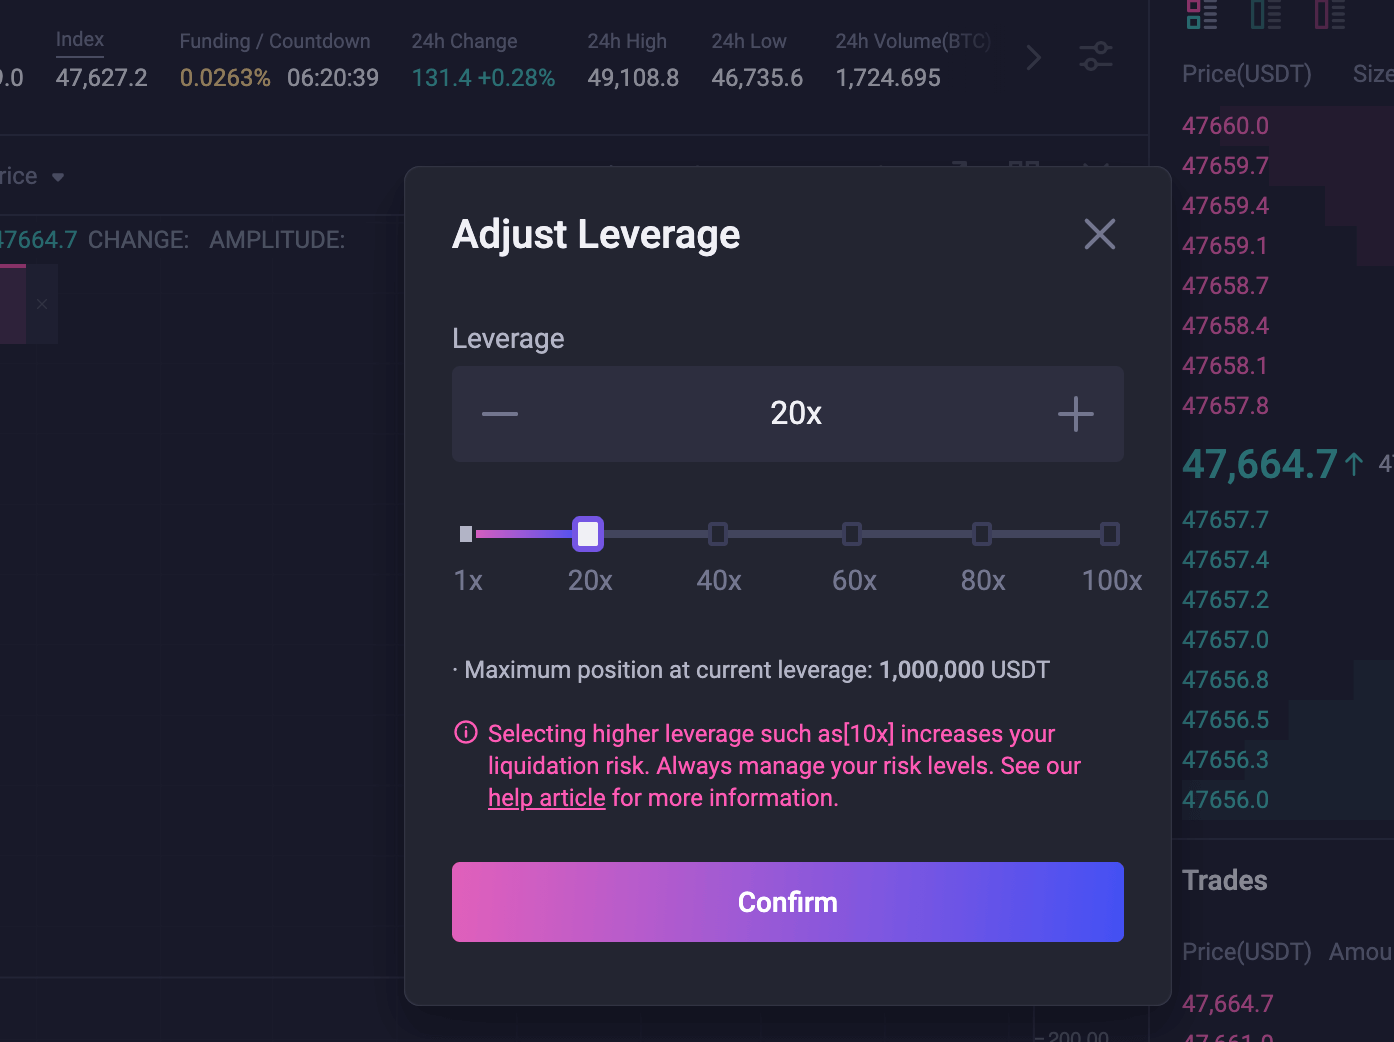 How to Deposit and Trade Crypto at ApolloX